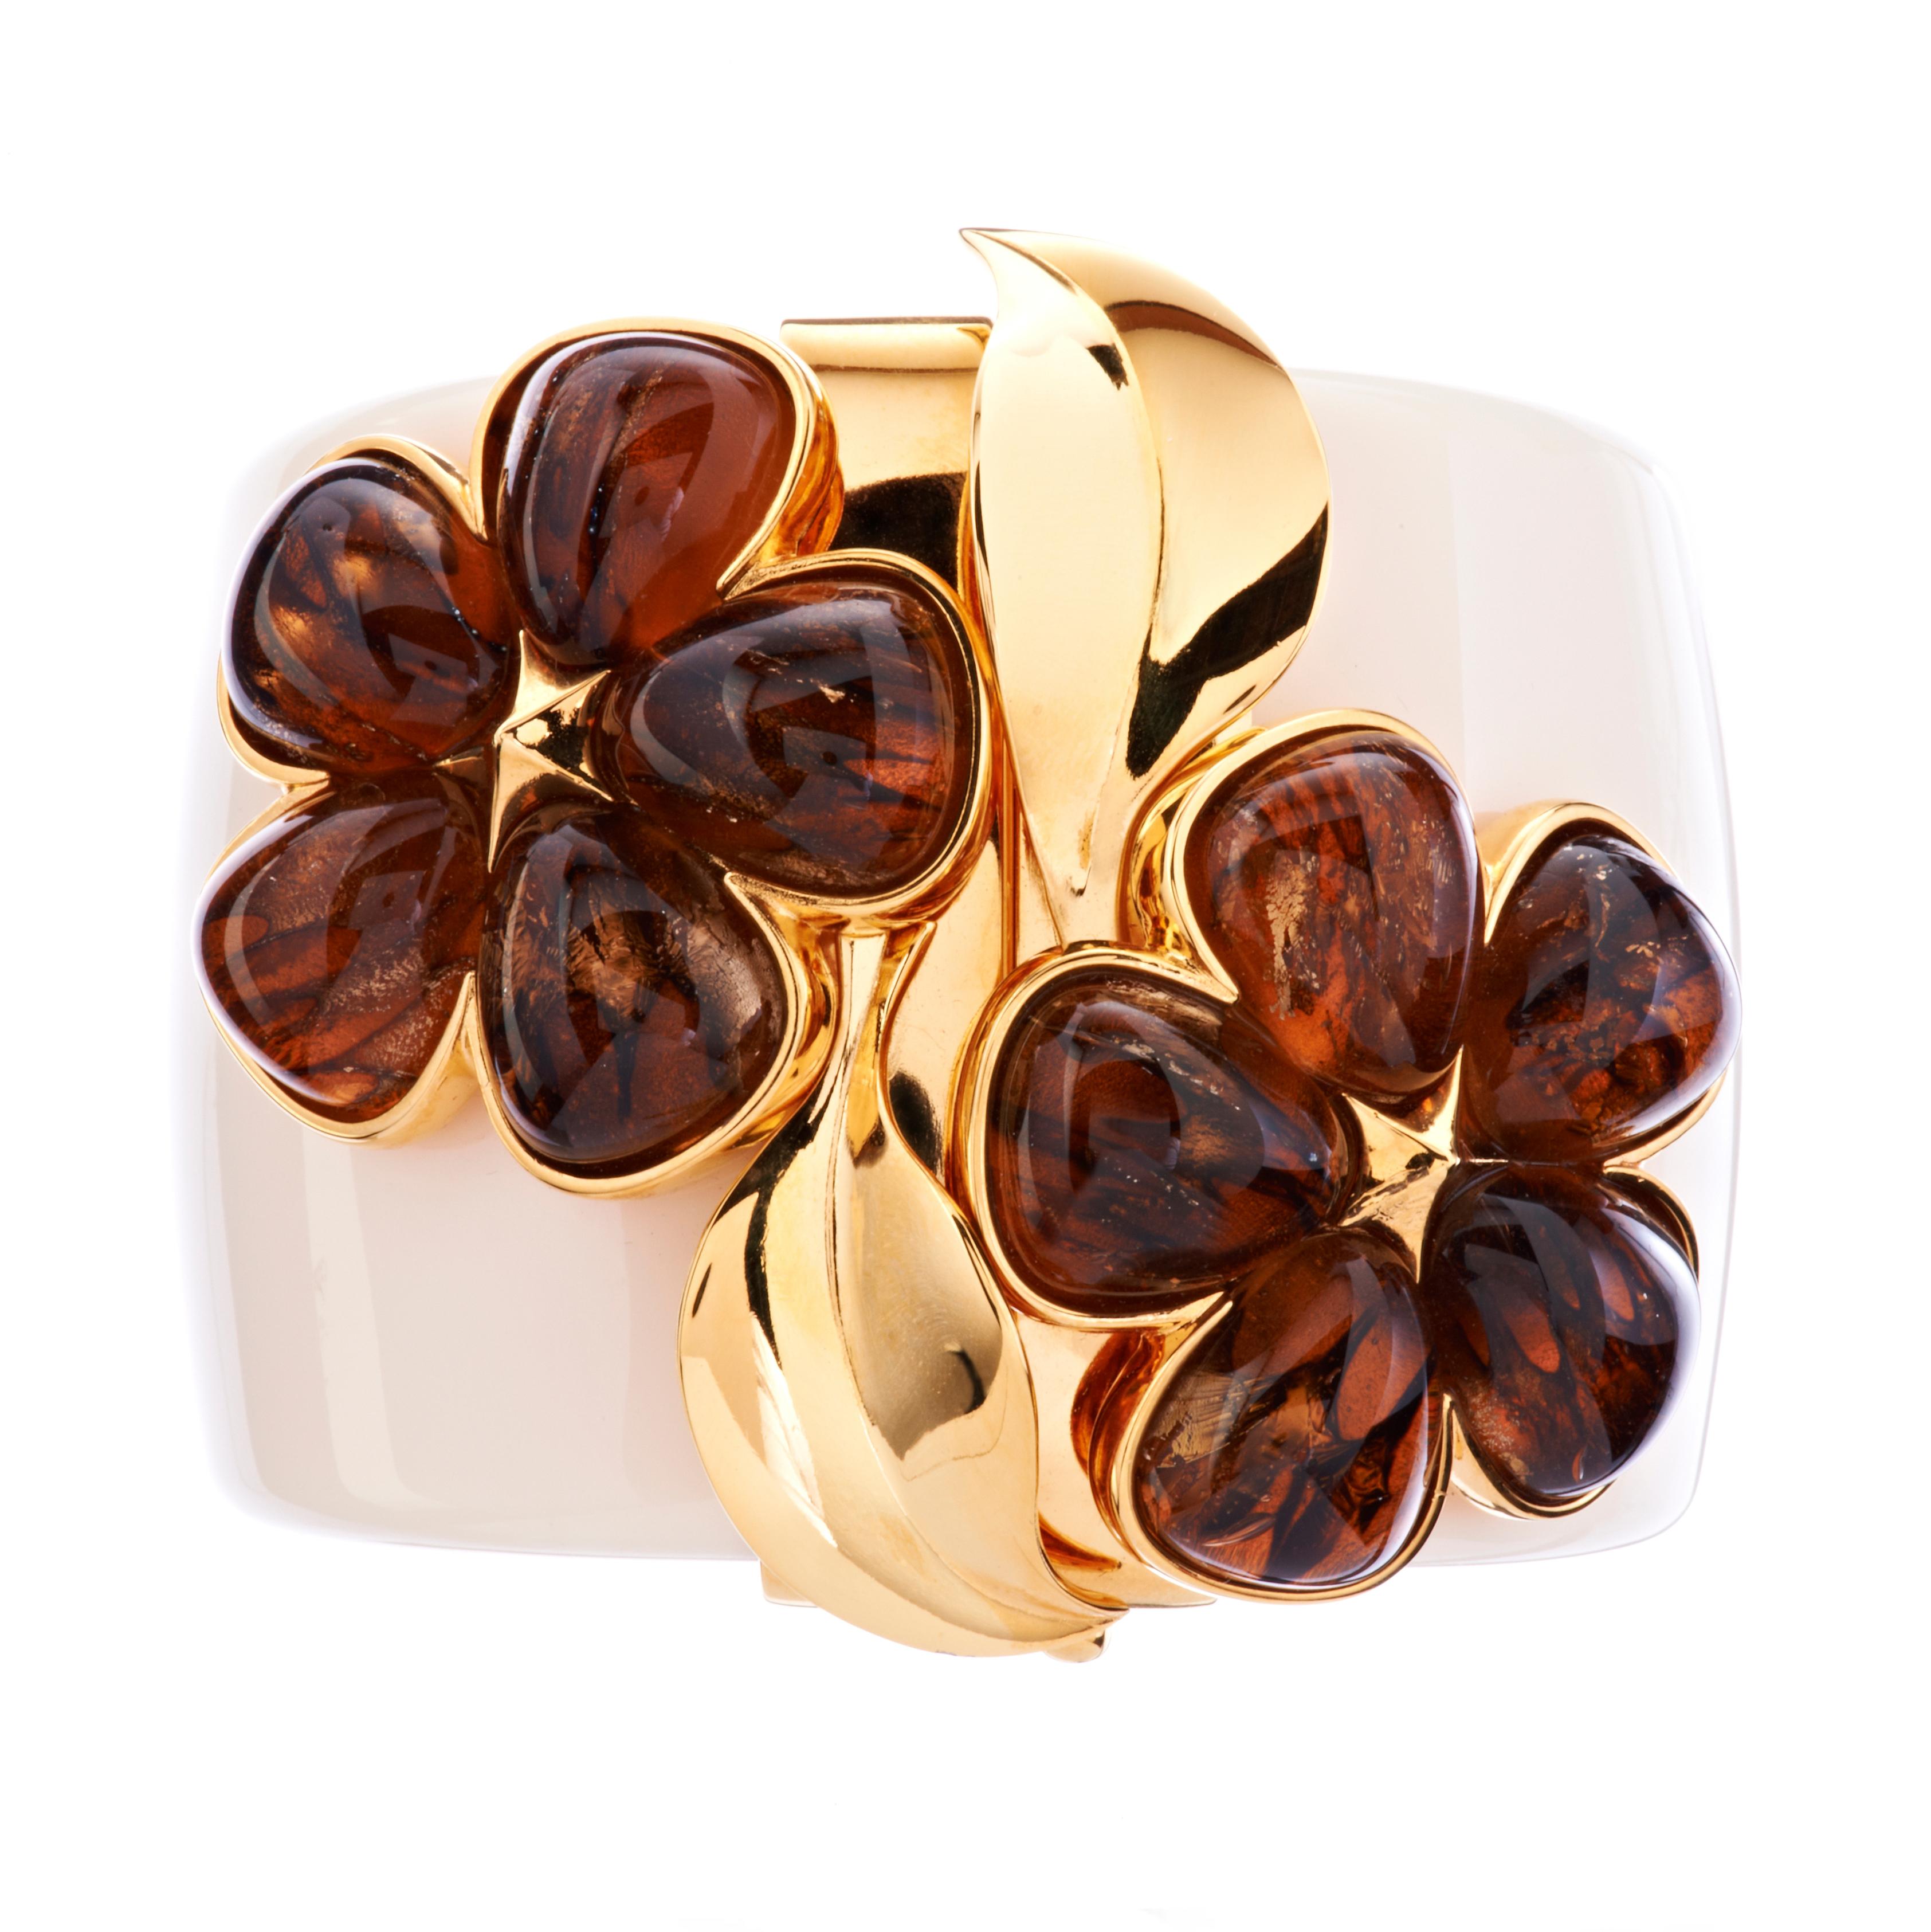 The Chloris bangle is set with delicately decorated glass petals with gold leaf inclusions. These are individually hand made by highly skilled artisans in Germany using an age old secret method.

This bangle comes in S/M and M/L sizes, and in black.
